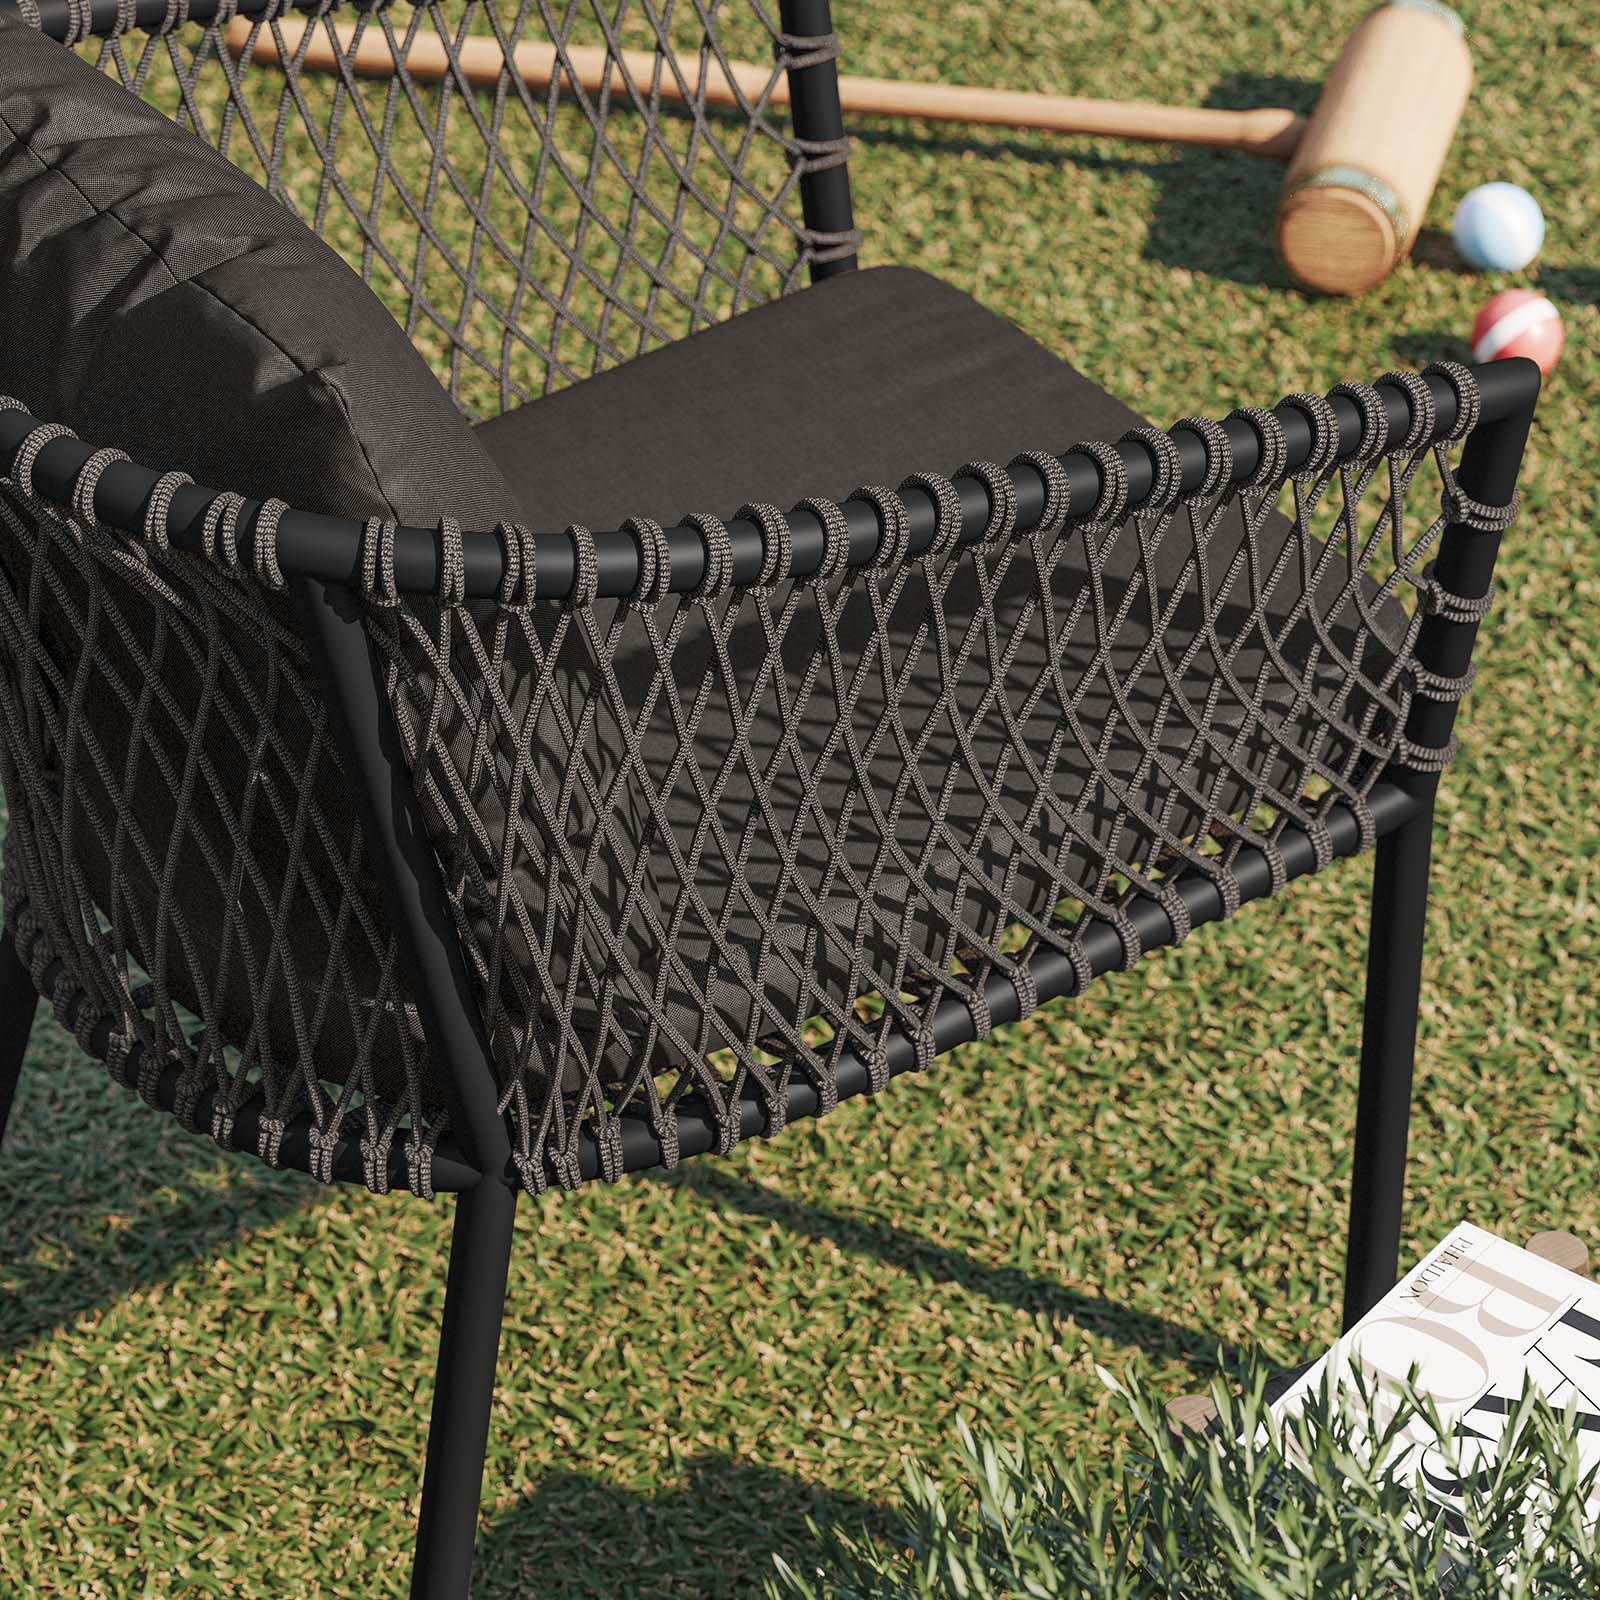 Sailor Outdoor Patio Dining Armchair - East Shore Modern Home Furnishings